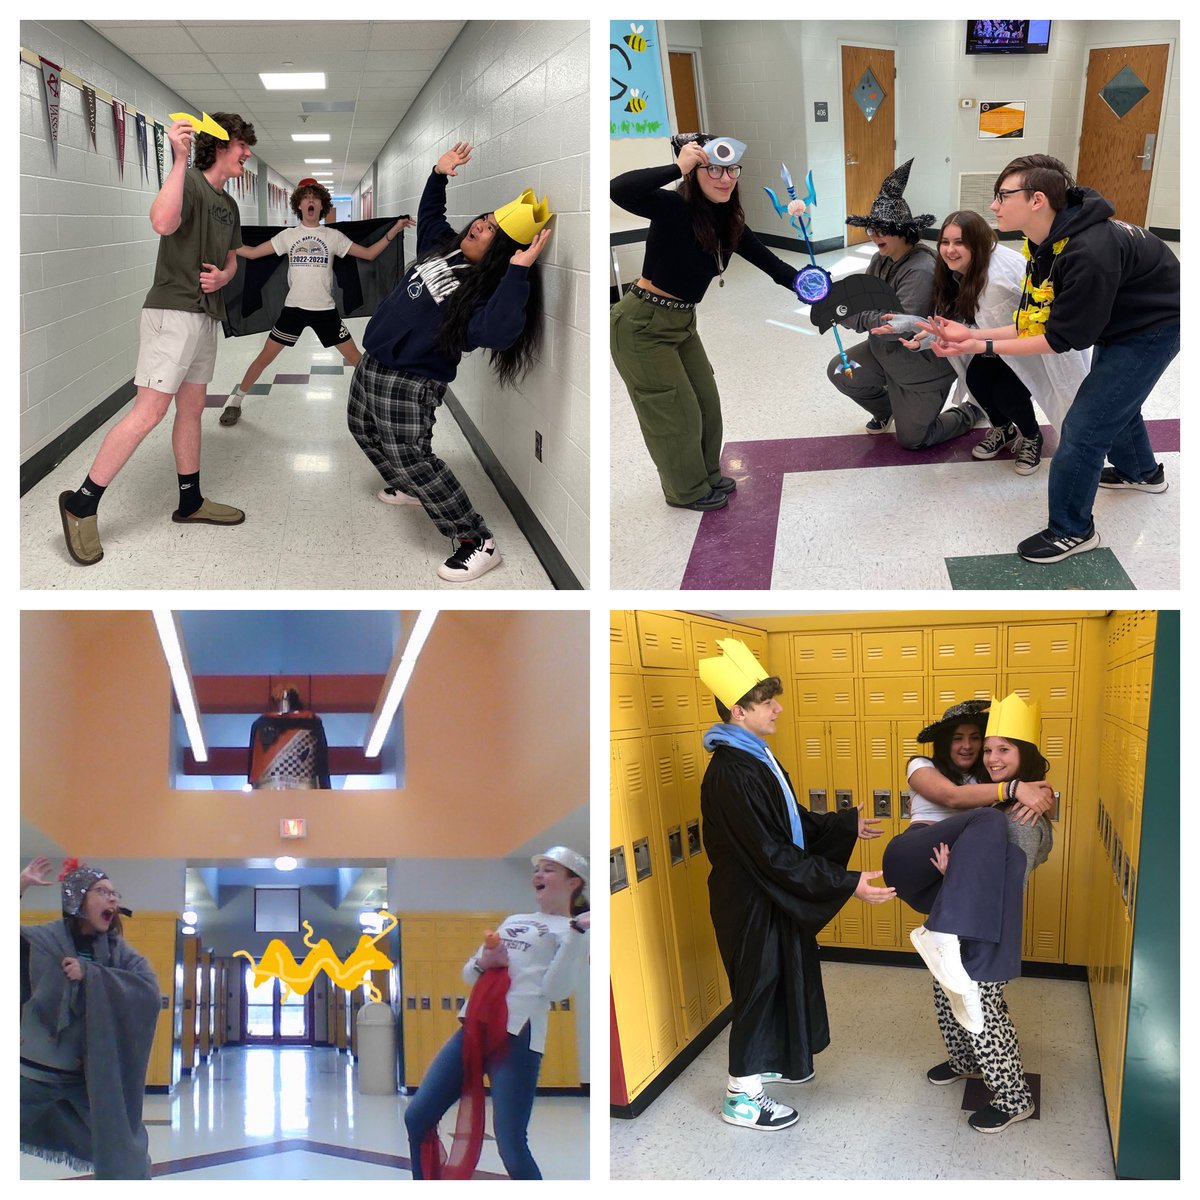 Shoutout to my students for making our first week of Greek mythology so much fun. Great job bringing scenes from our readings this week to life! ⚡️👑🔱